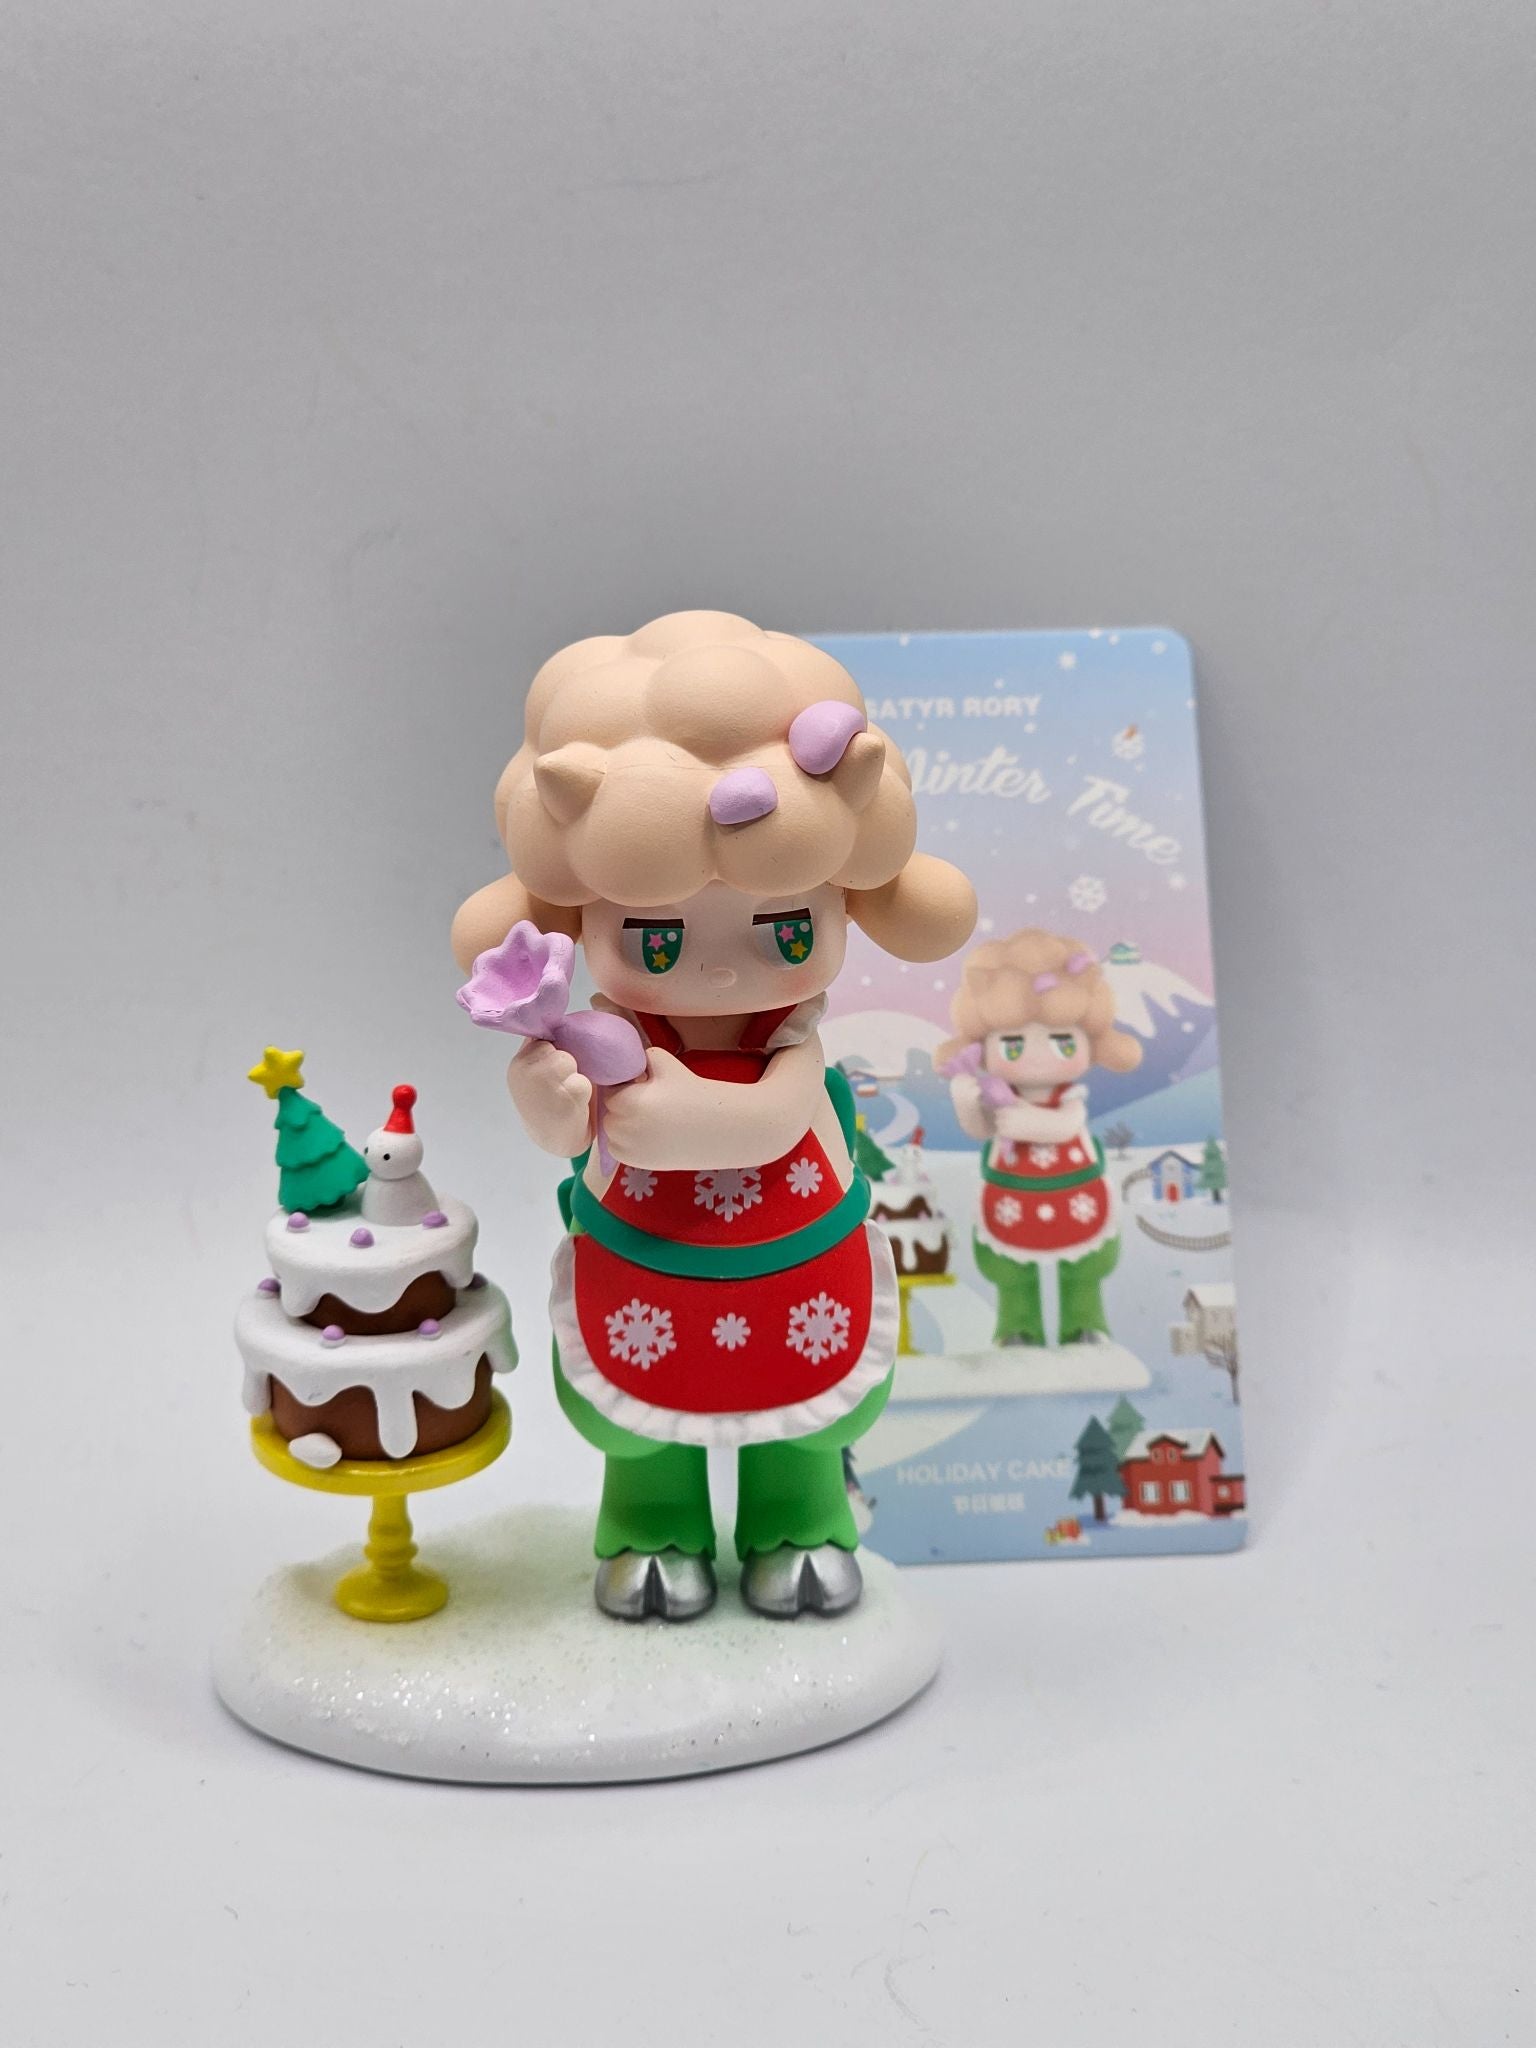 Holiday Cake - Satyr Rory Cozy Winter Time Blind Box Series - Popmart - 1